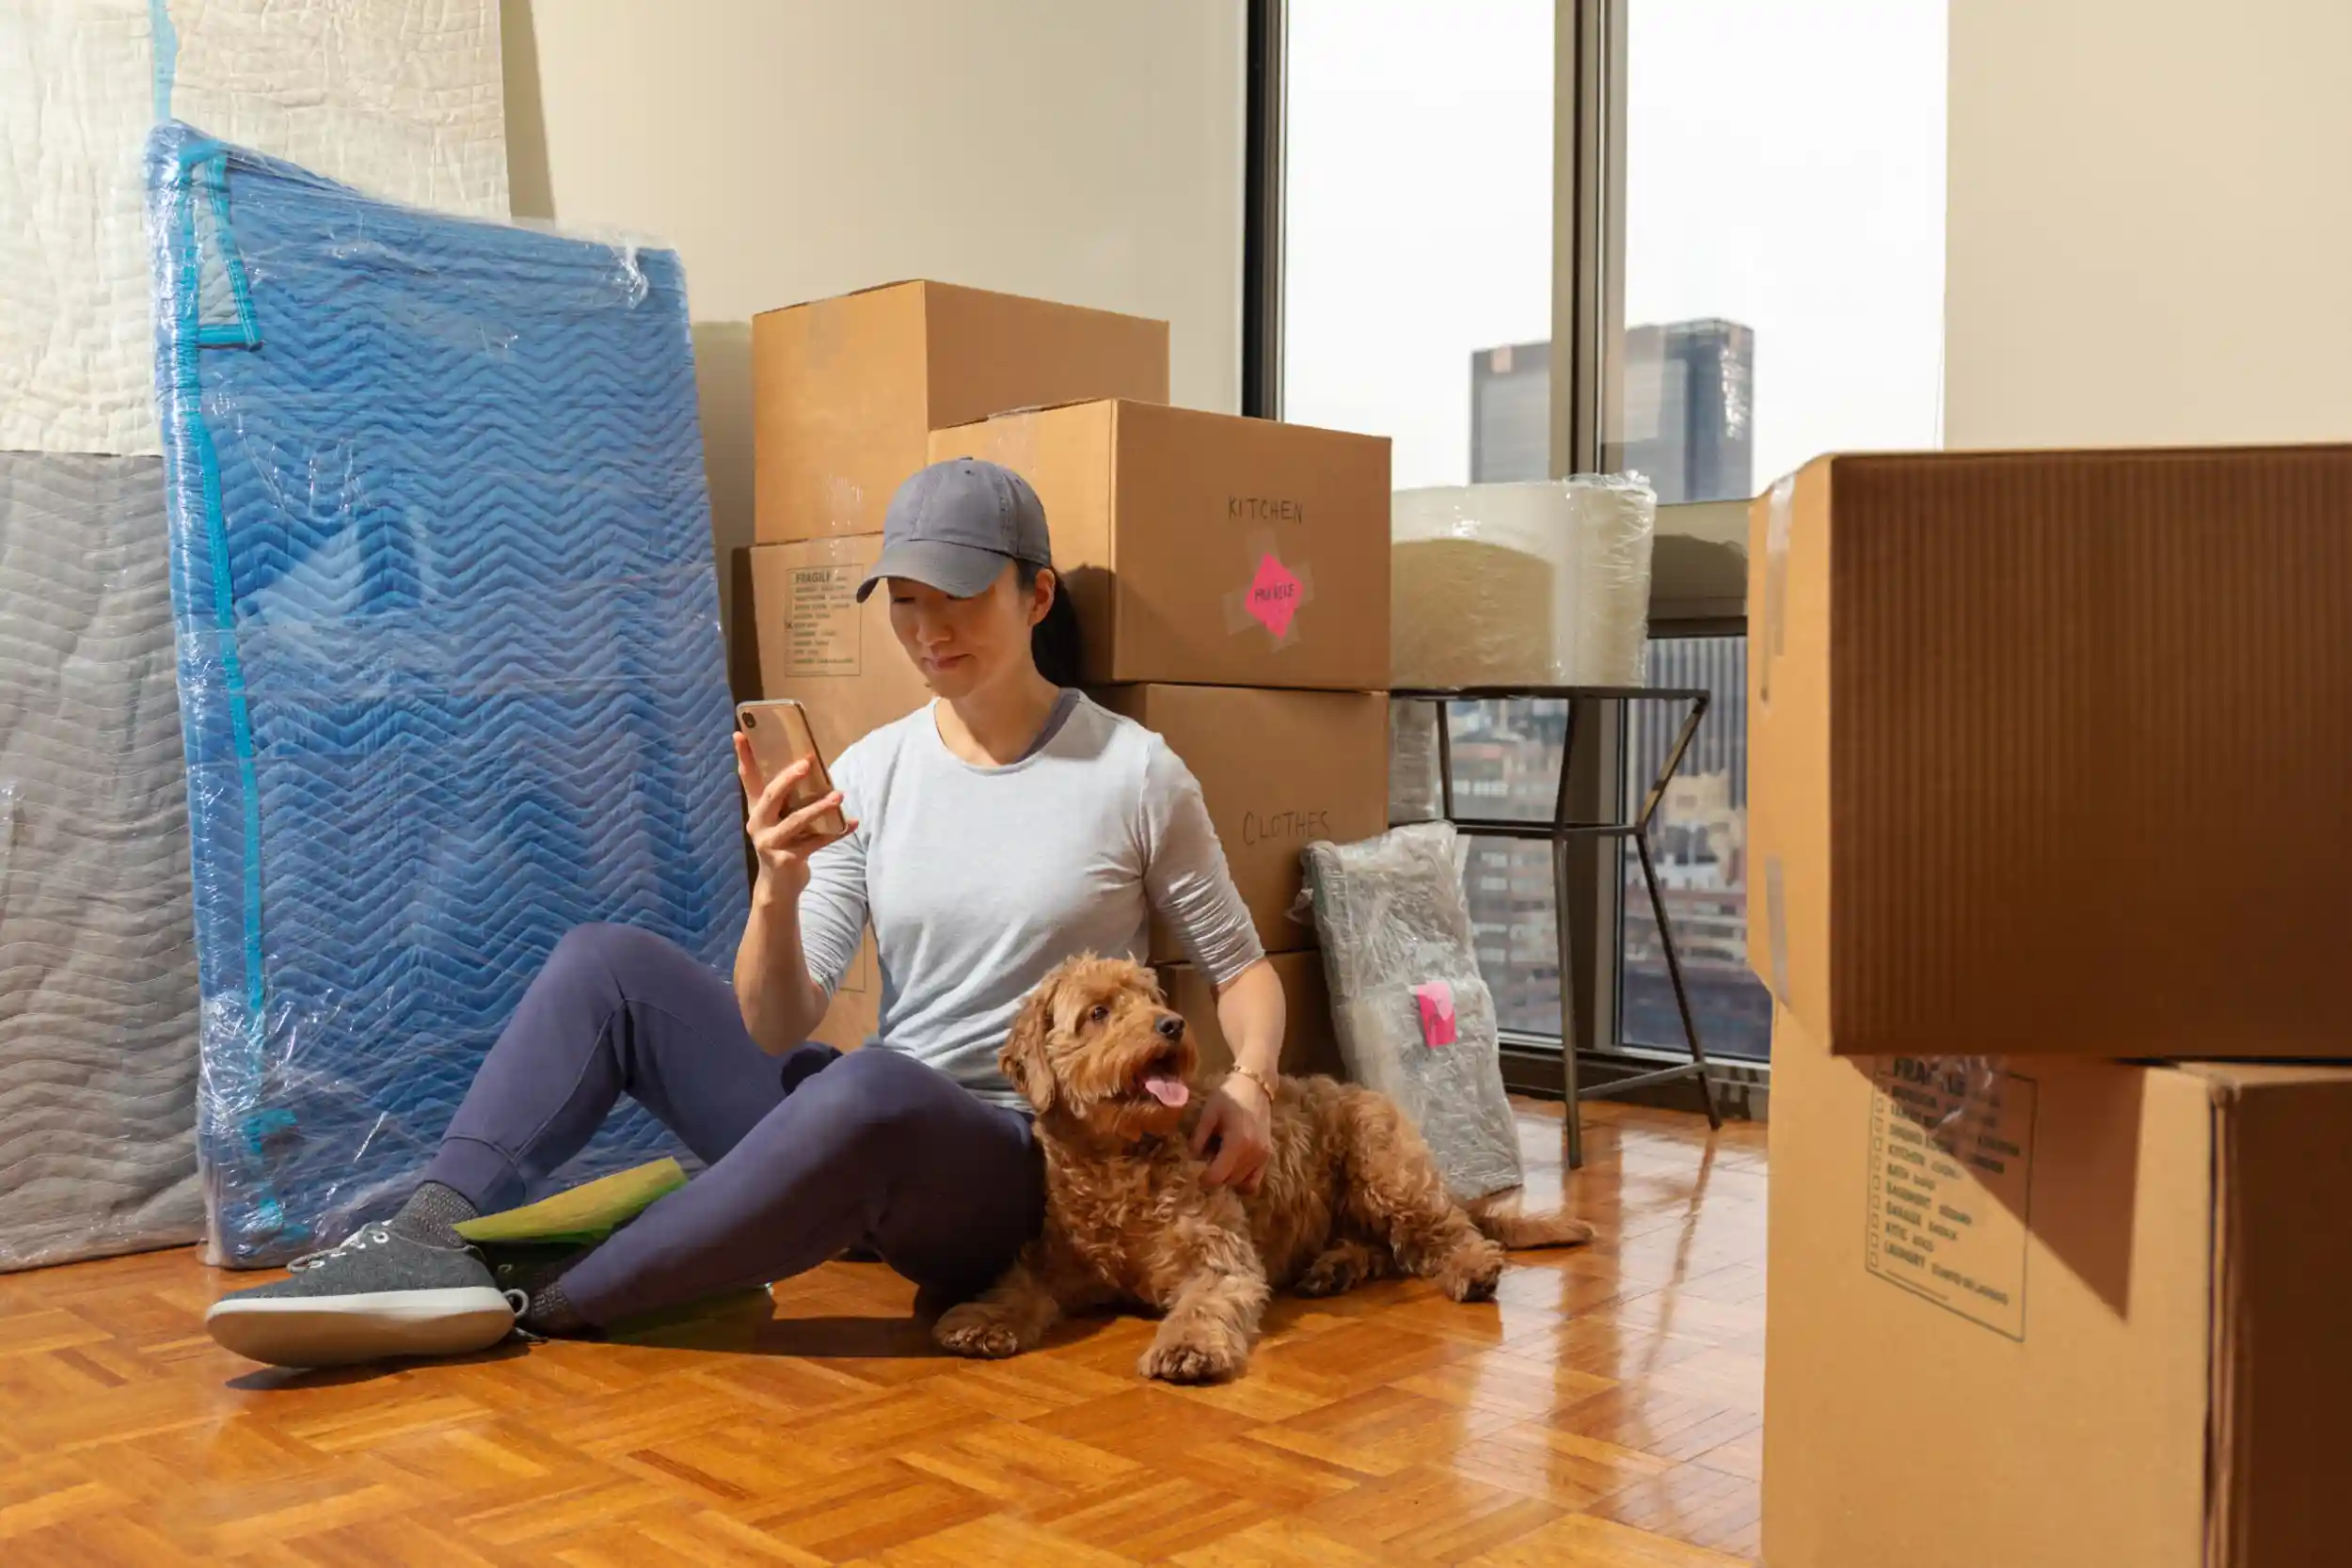 When Should You Start Packing to Move? - Bellhop